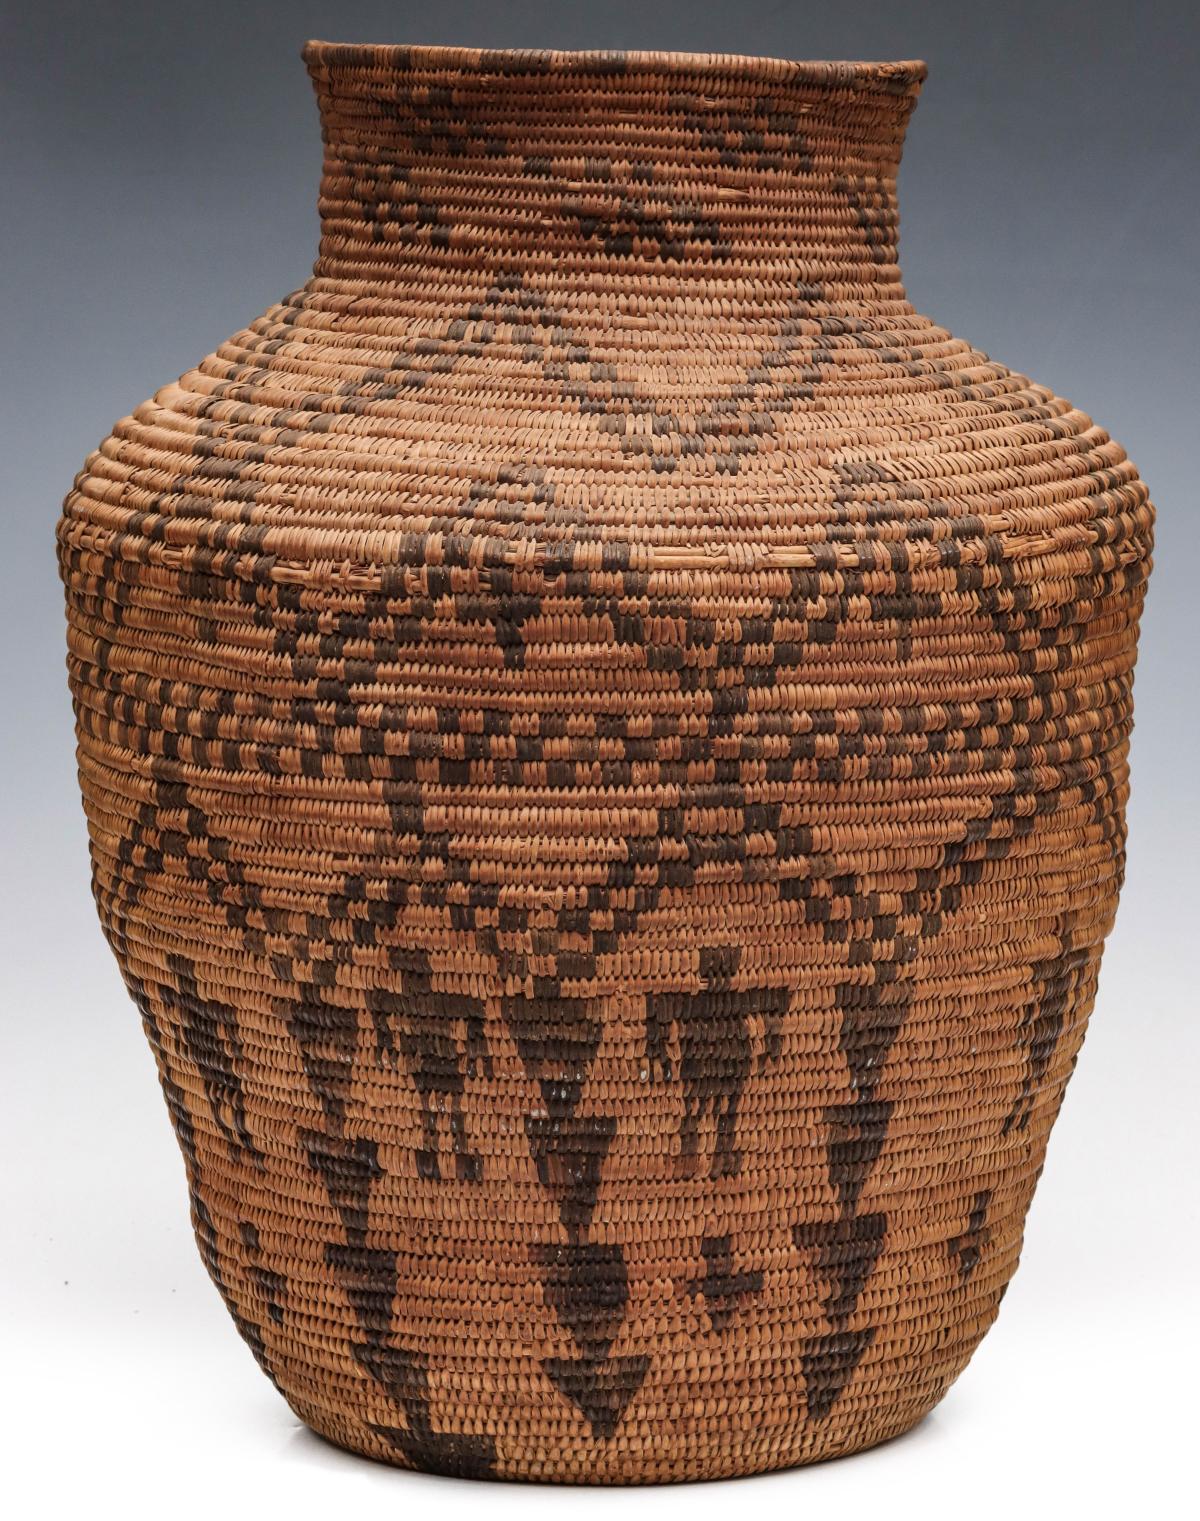 A 17-INCH APACHE OLLA BASKET WITH FIGURES C. 1930